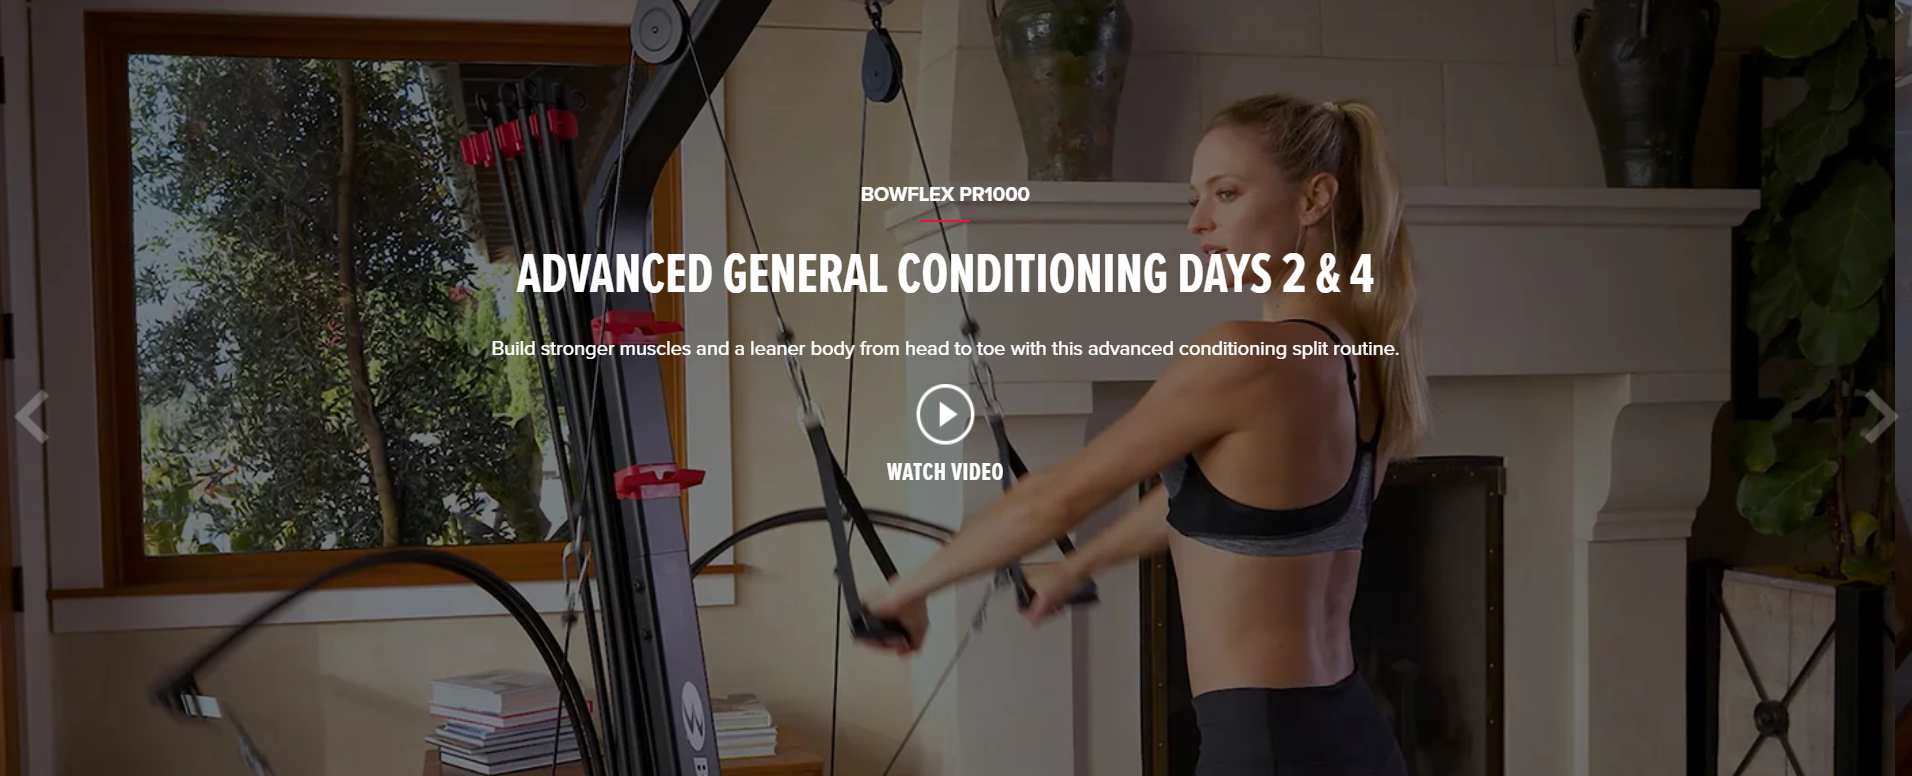 Bowflex advanced general conditioning day 2&4 YouTube video